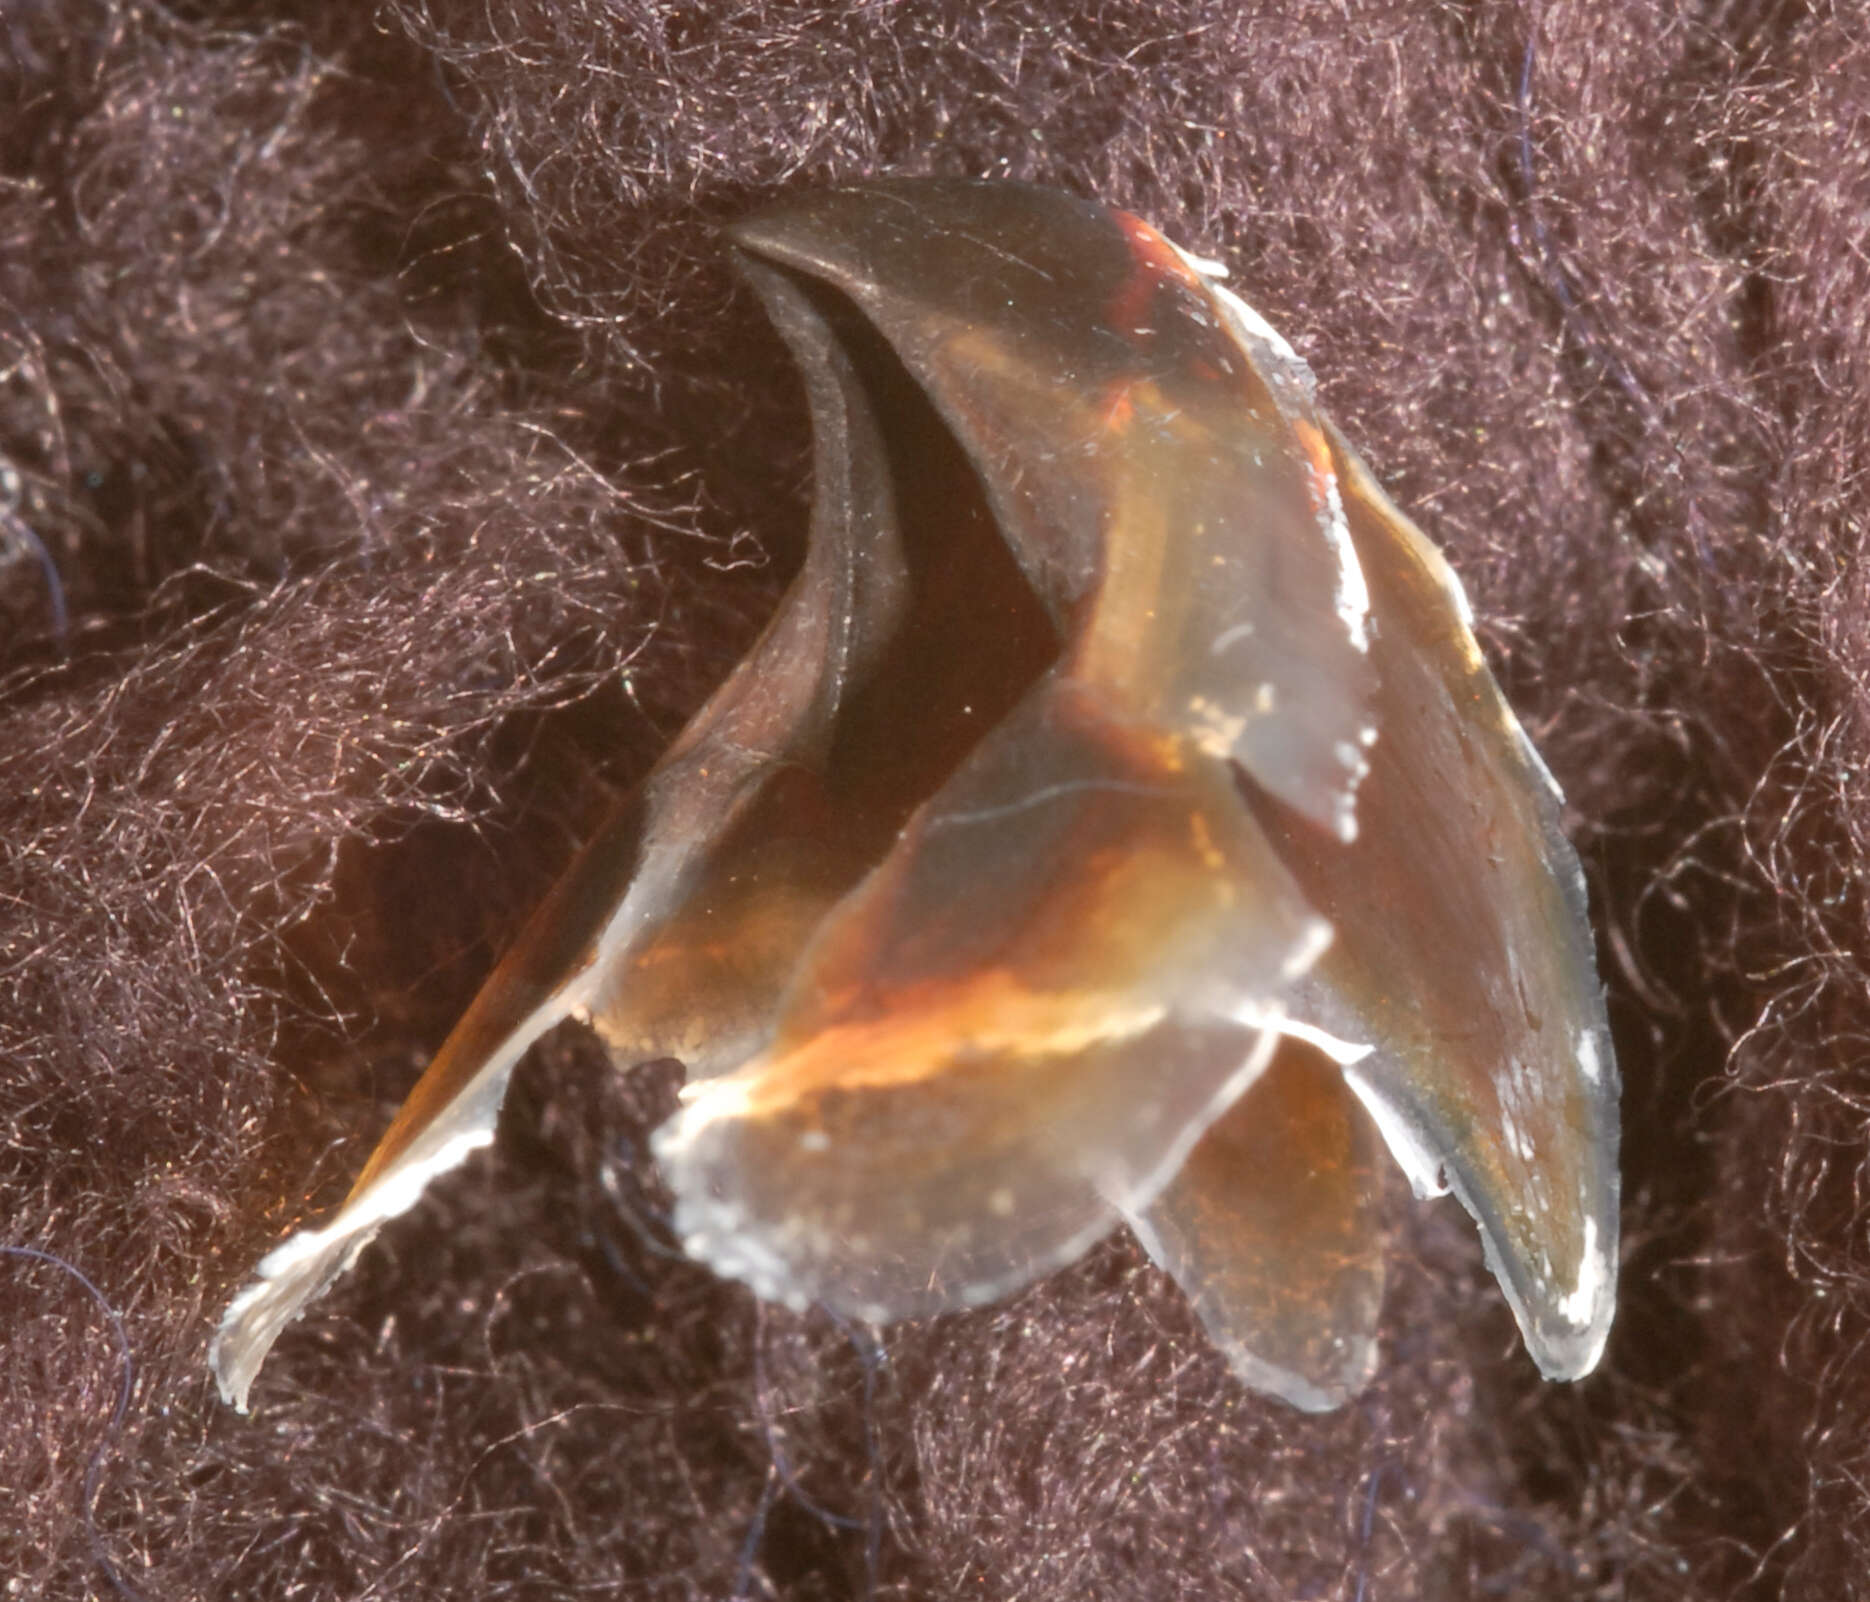 Image of Firefly squid